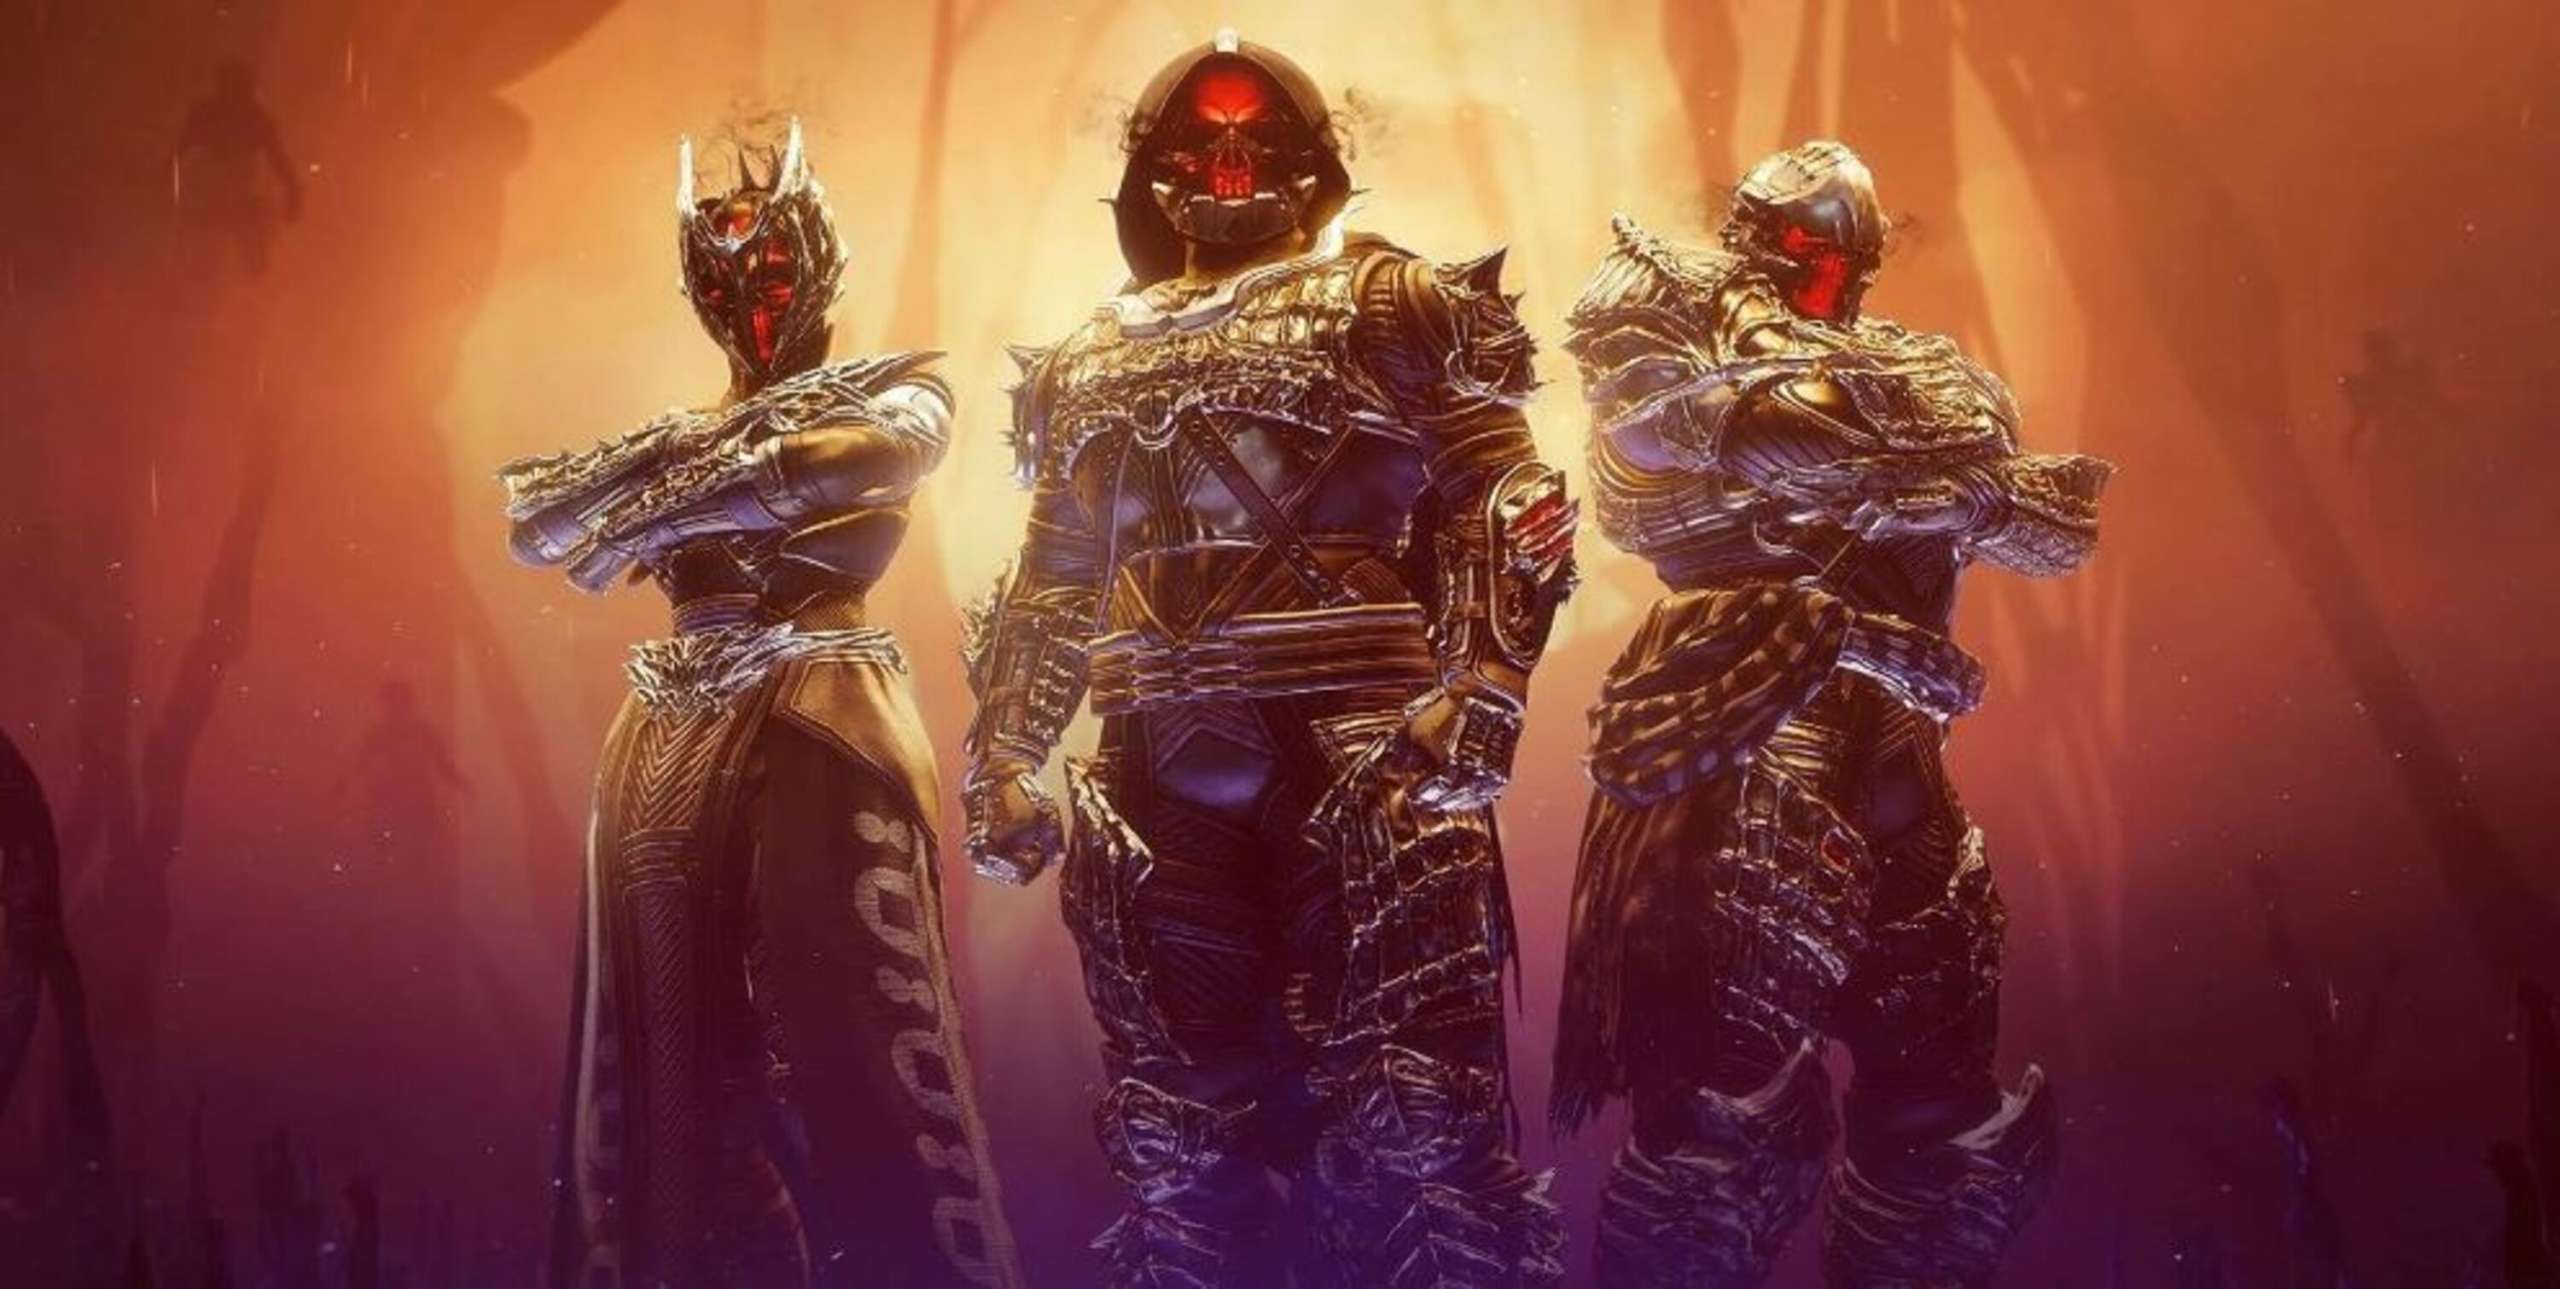 Three New Armour Sets Were Recently Discovered To Be Part Of A New Destiny 2 Inspired By The Fortnite Crossover